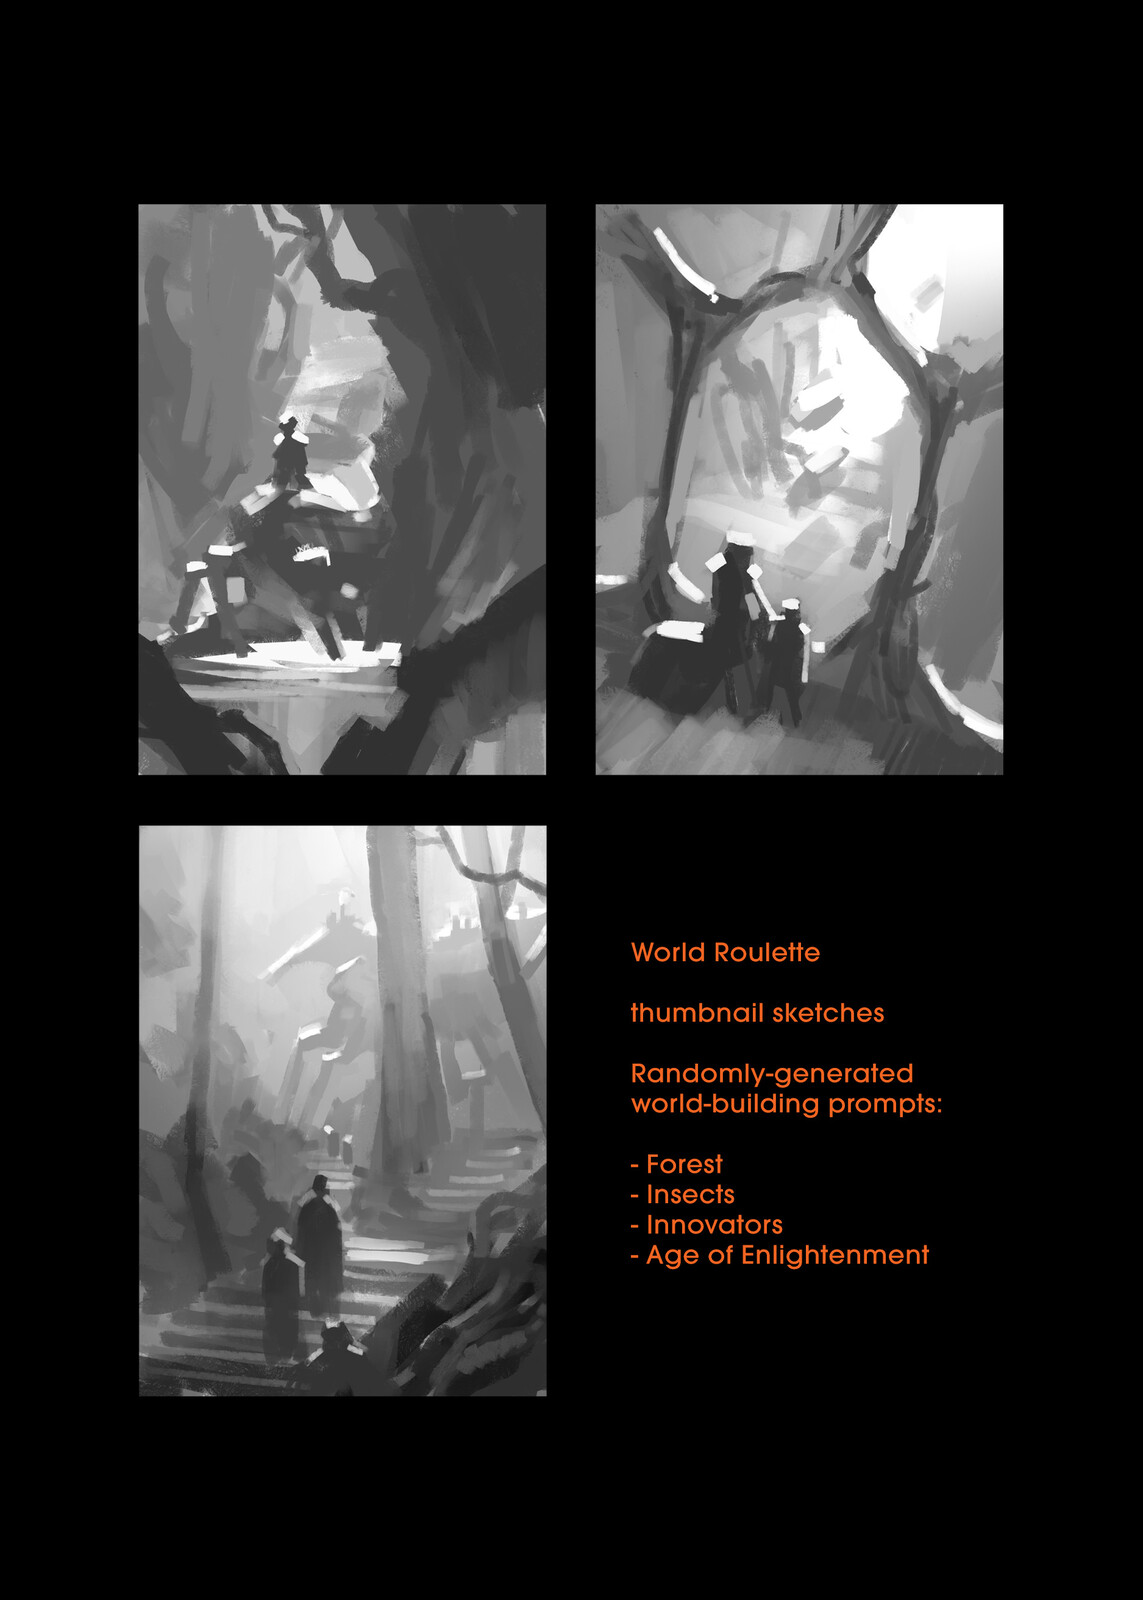 Thumbnail sketches based on prompts randomly generated for us by the Light Grey Art Lab.